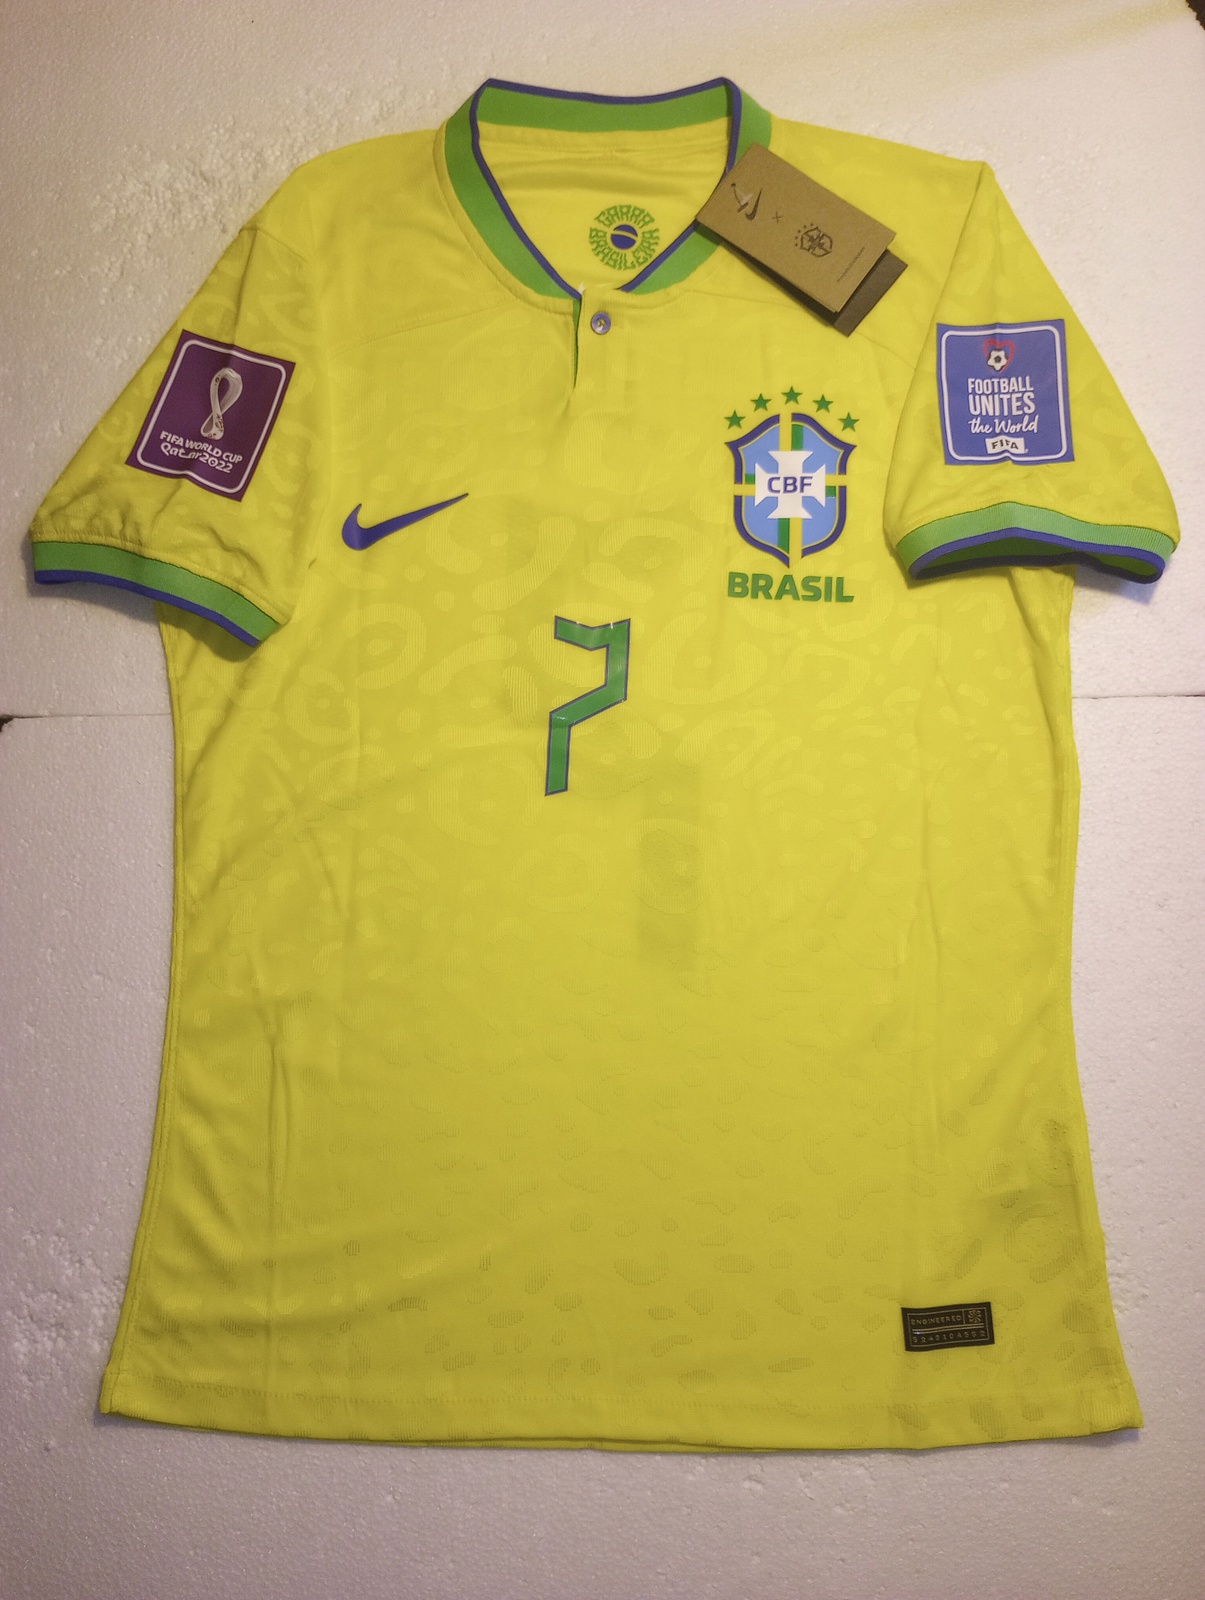 Primary image for Lucas Paqueta Brazil 2022 World Cup Qatar Match Slim Yellow Home Soccer Jersey